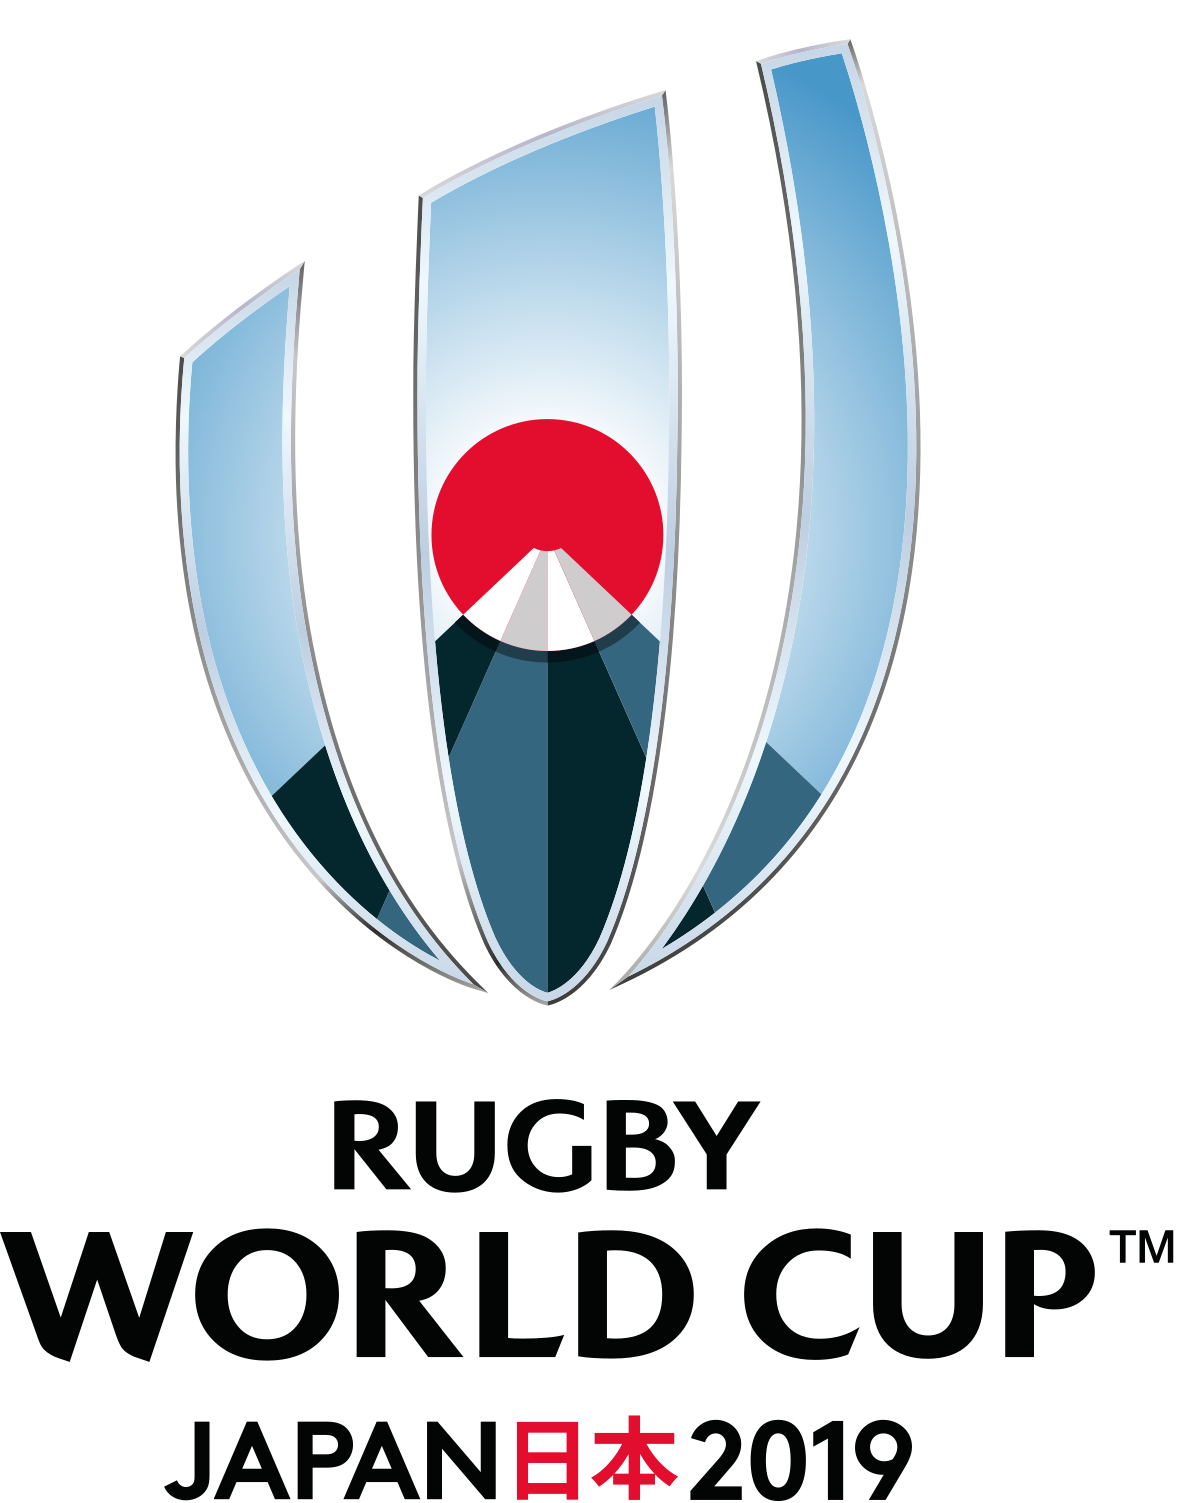 2019 Rugby World Cup - Wikipedia